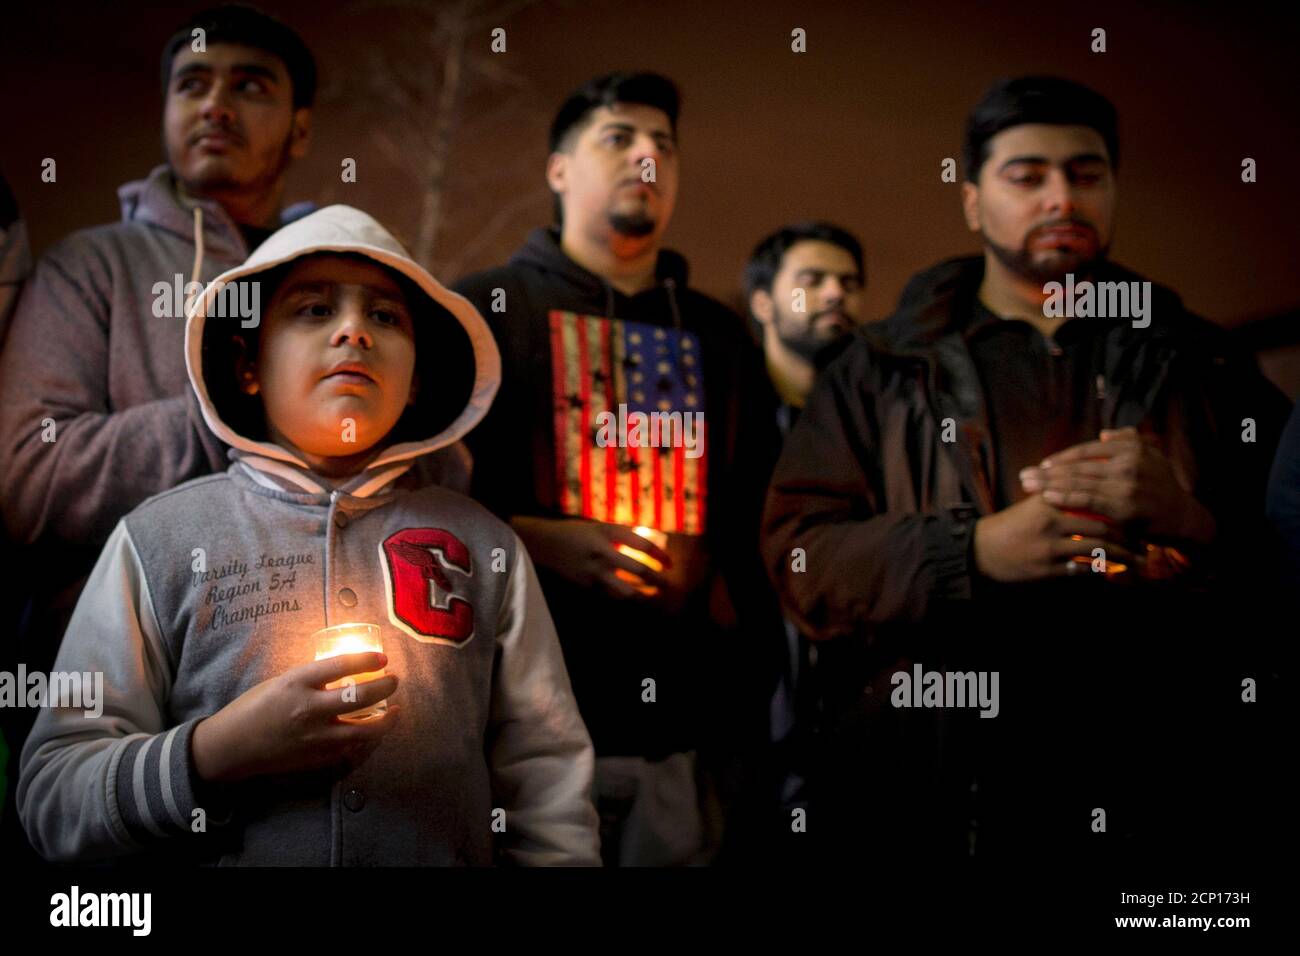 People hold candles during a vigil for victims killed in the attack by Taliban gunmen on the Army Public School in Peshawar Pakistan, in the Brooklyn borough of New York December 17, 2014. Pakistan on Wednesday began burying 132 students killed in a grisly attack on their school by Taliban militants that has heaped pressure on the government to do more to tackle an increasingly aggressive Taliban insurgency. REUTERS/Brendan McDermid (UNITED STATES - Tags: EDUCATION CRIME LAW SOCIETY CIVIL UNREST) Stock Photo